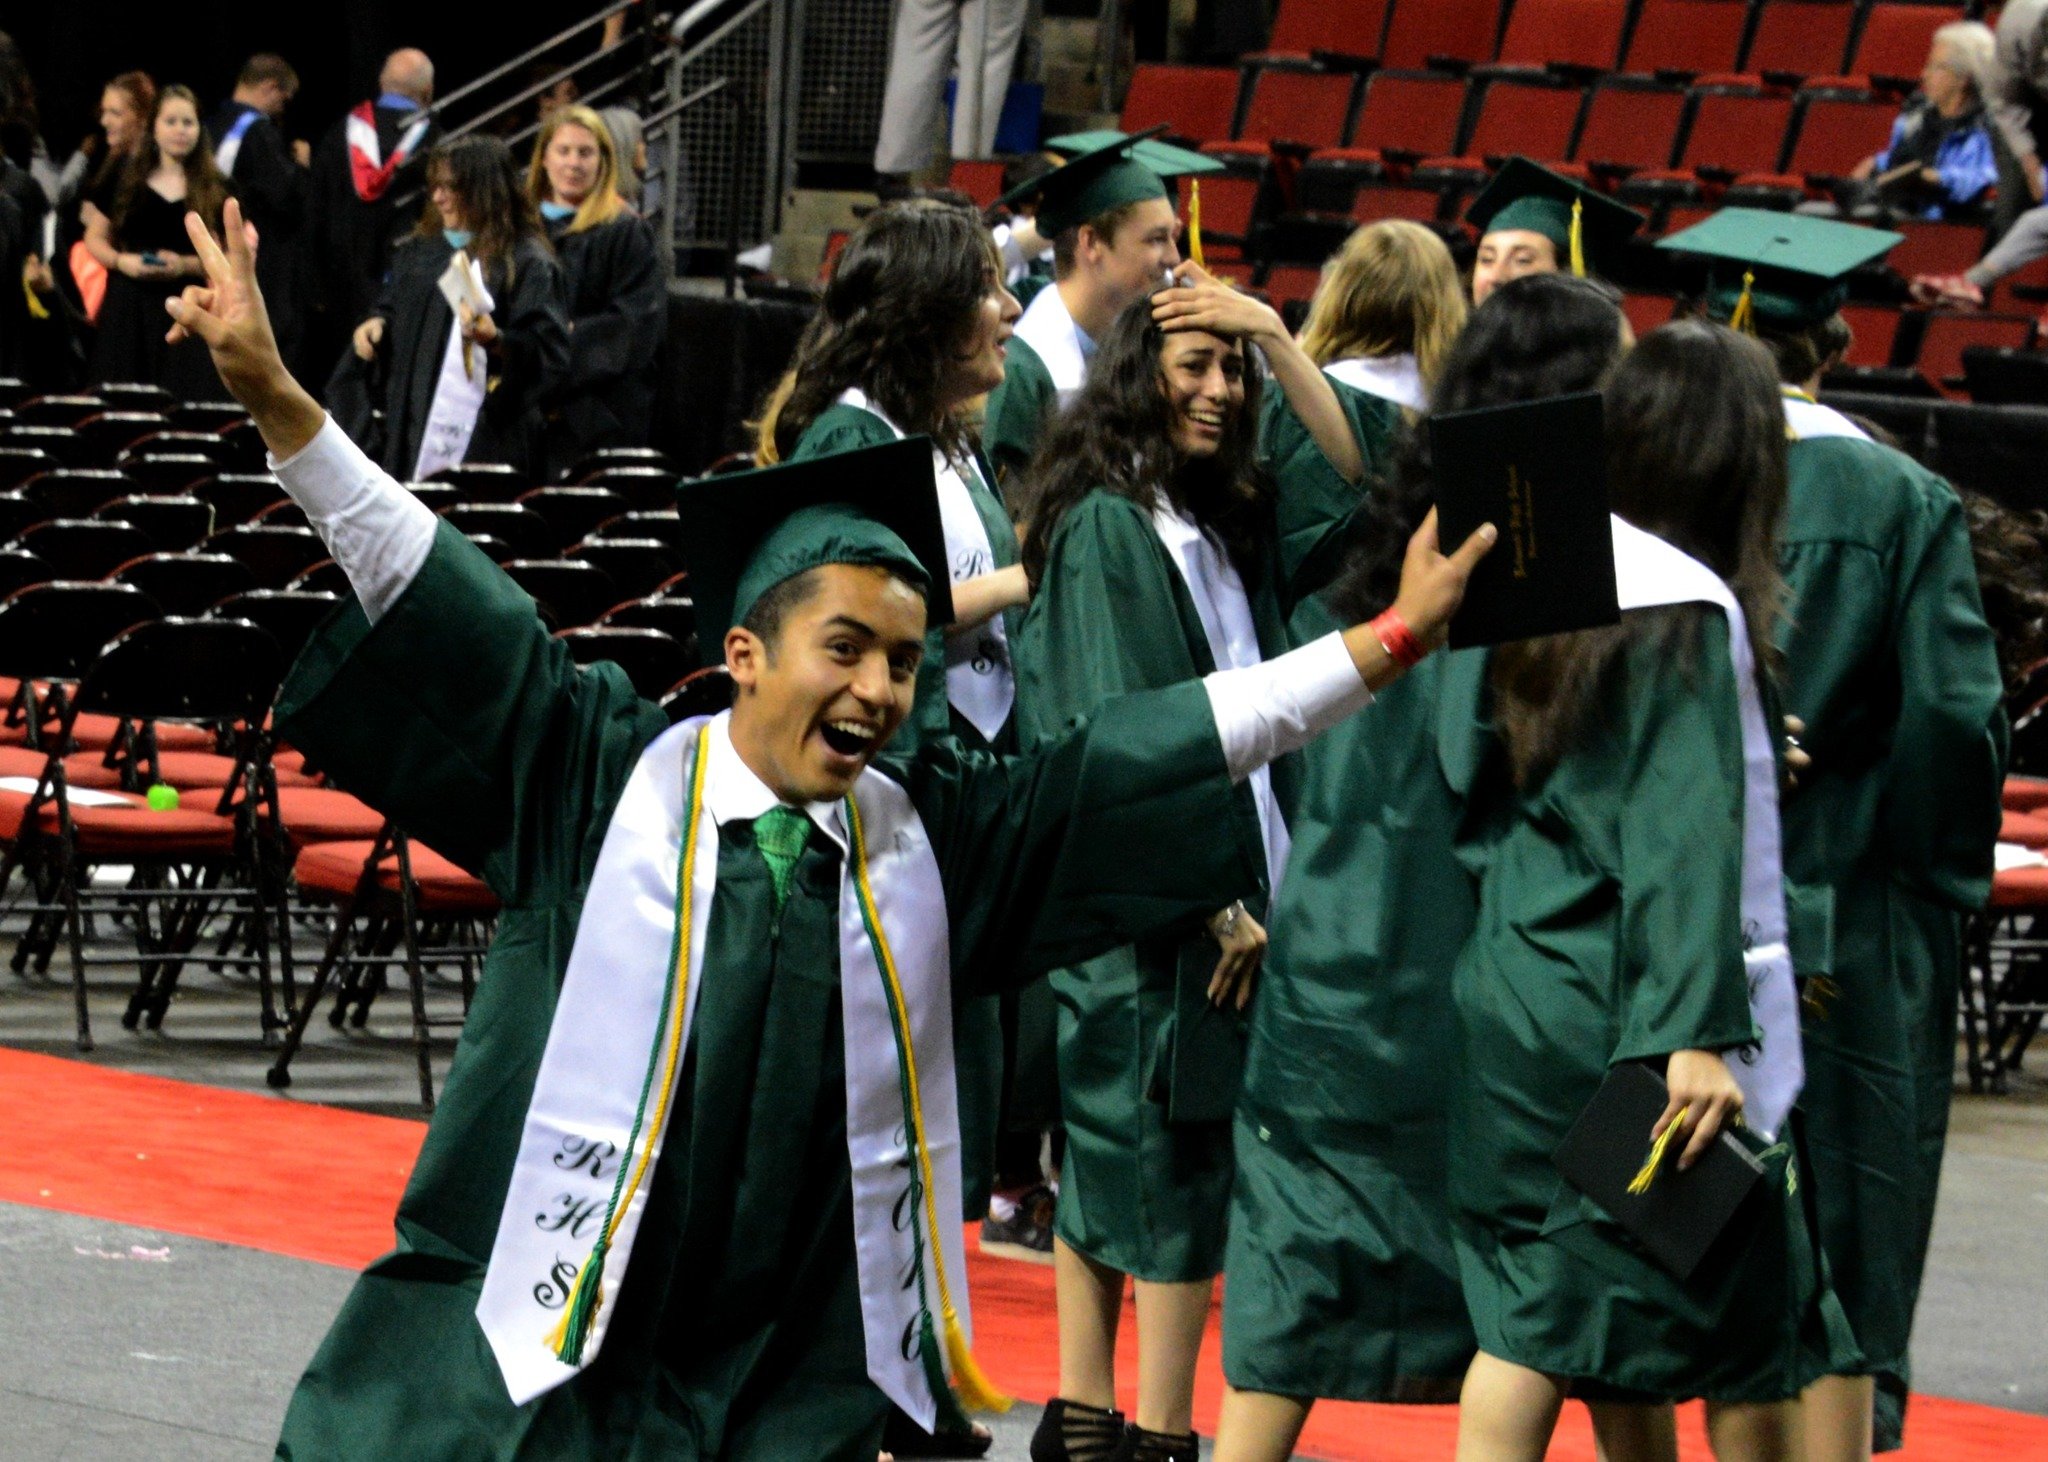 Redmond High graduate Jacob Montiel-Bravo celebrates after tonight’s commencement at KeyArena in Seattle. Andy Nystrom